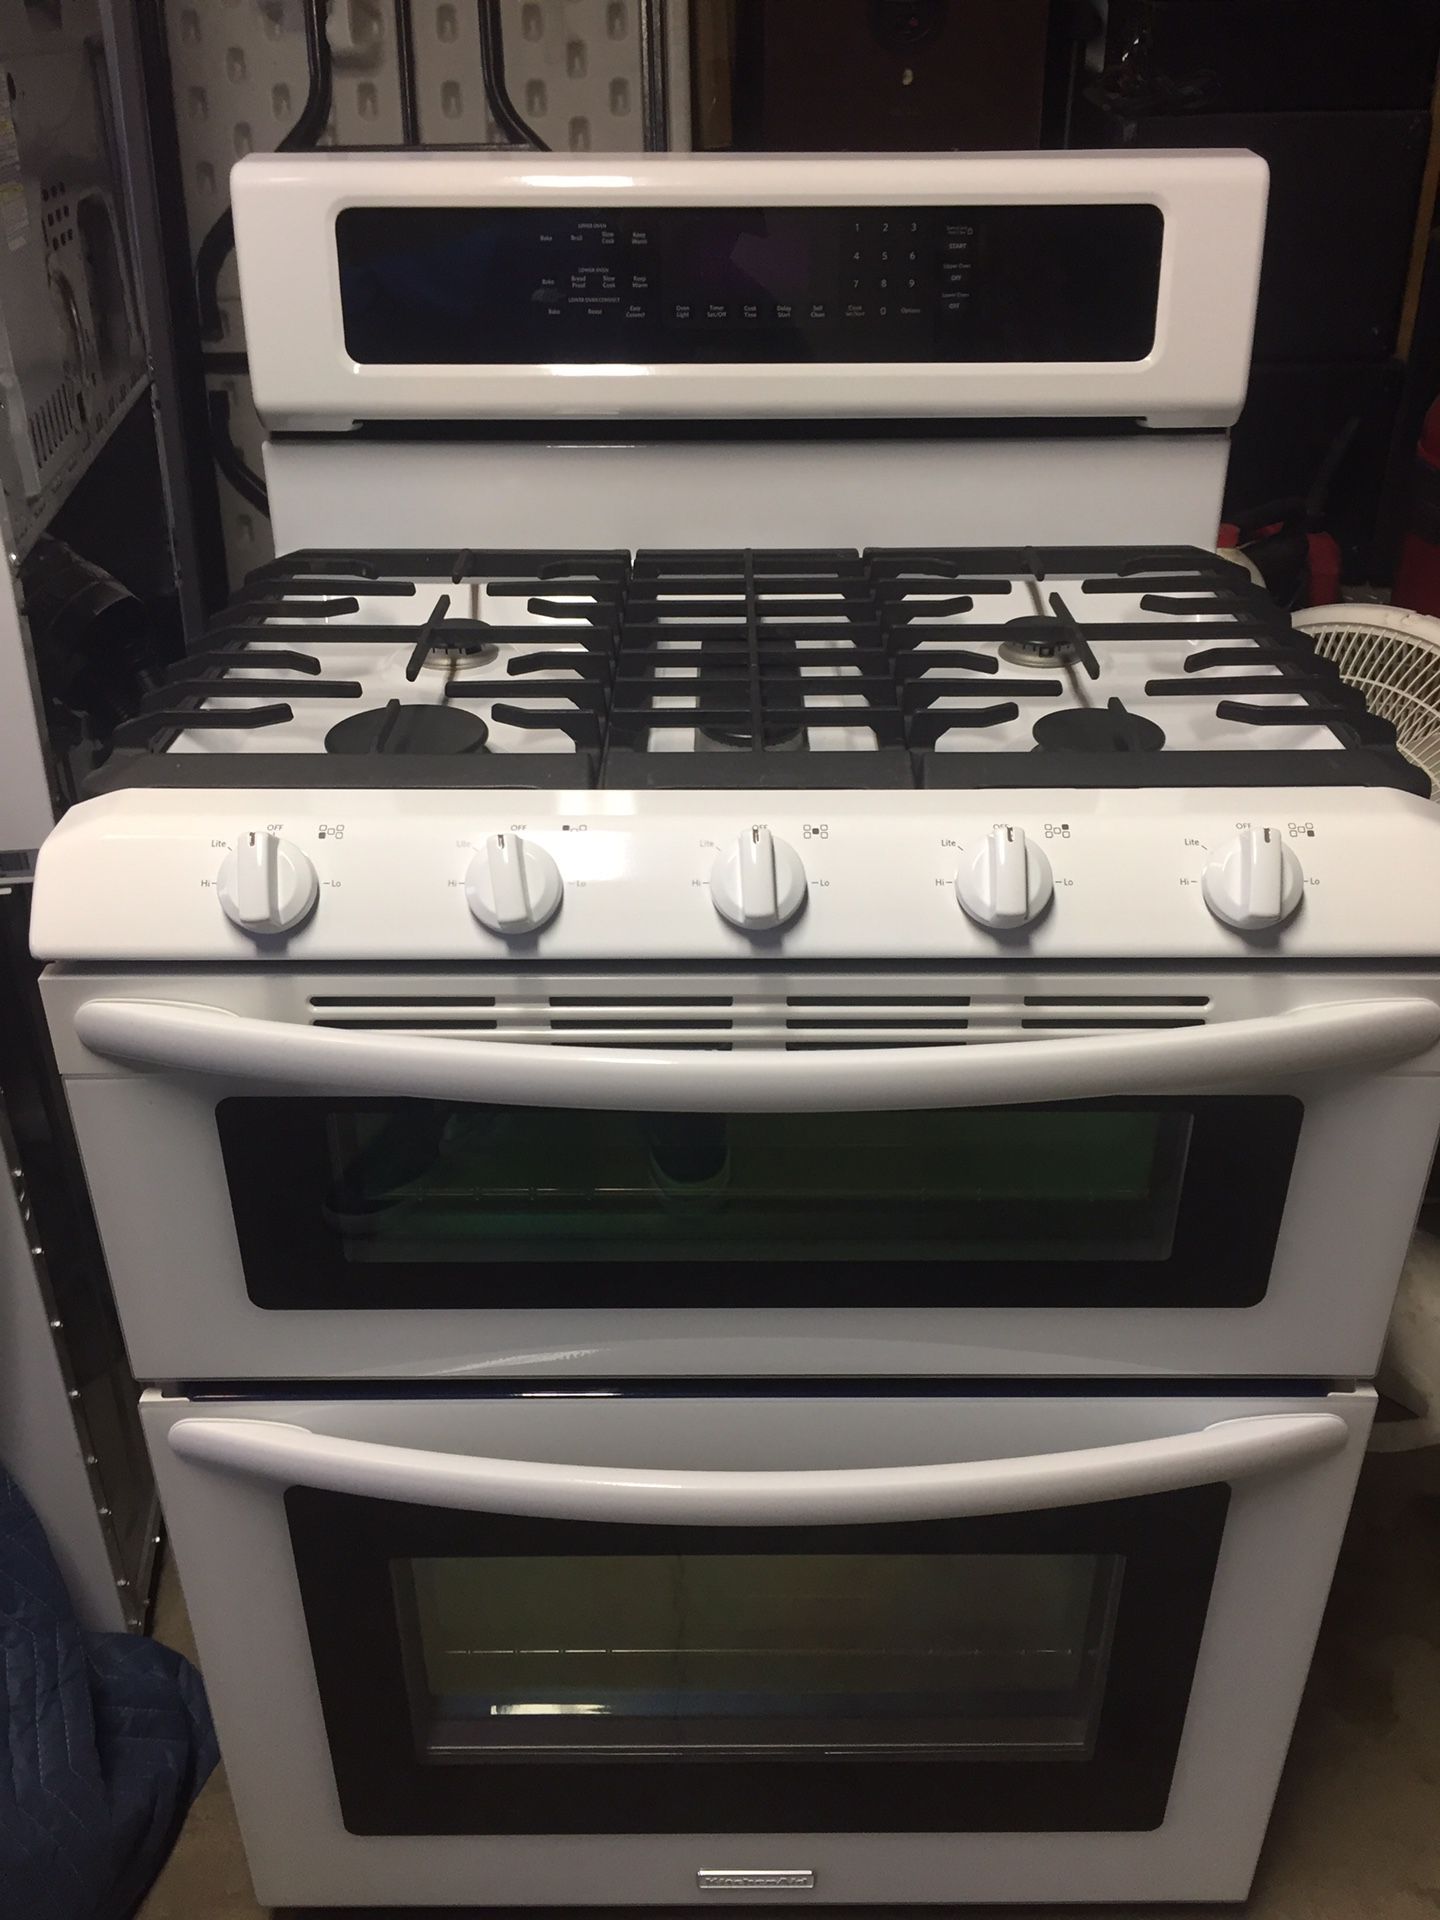 Kitchenaid stove / conventional oven with matching microwave hood combo